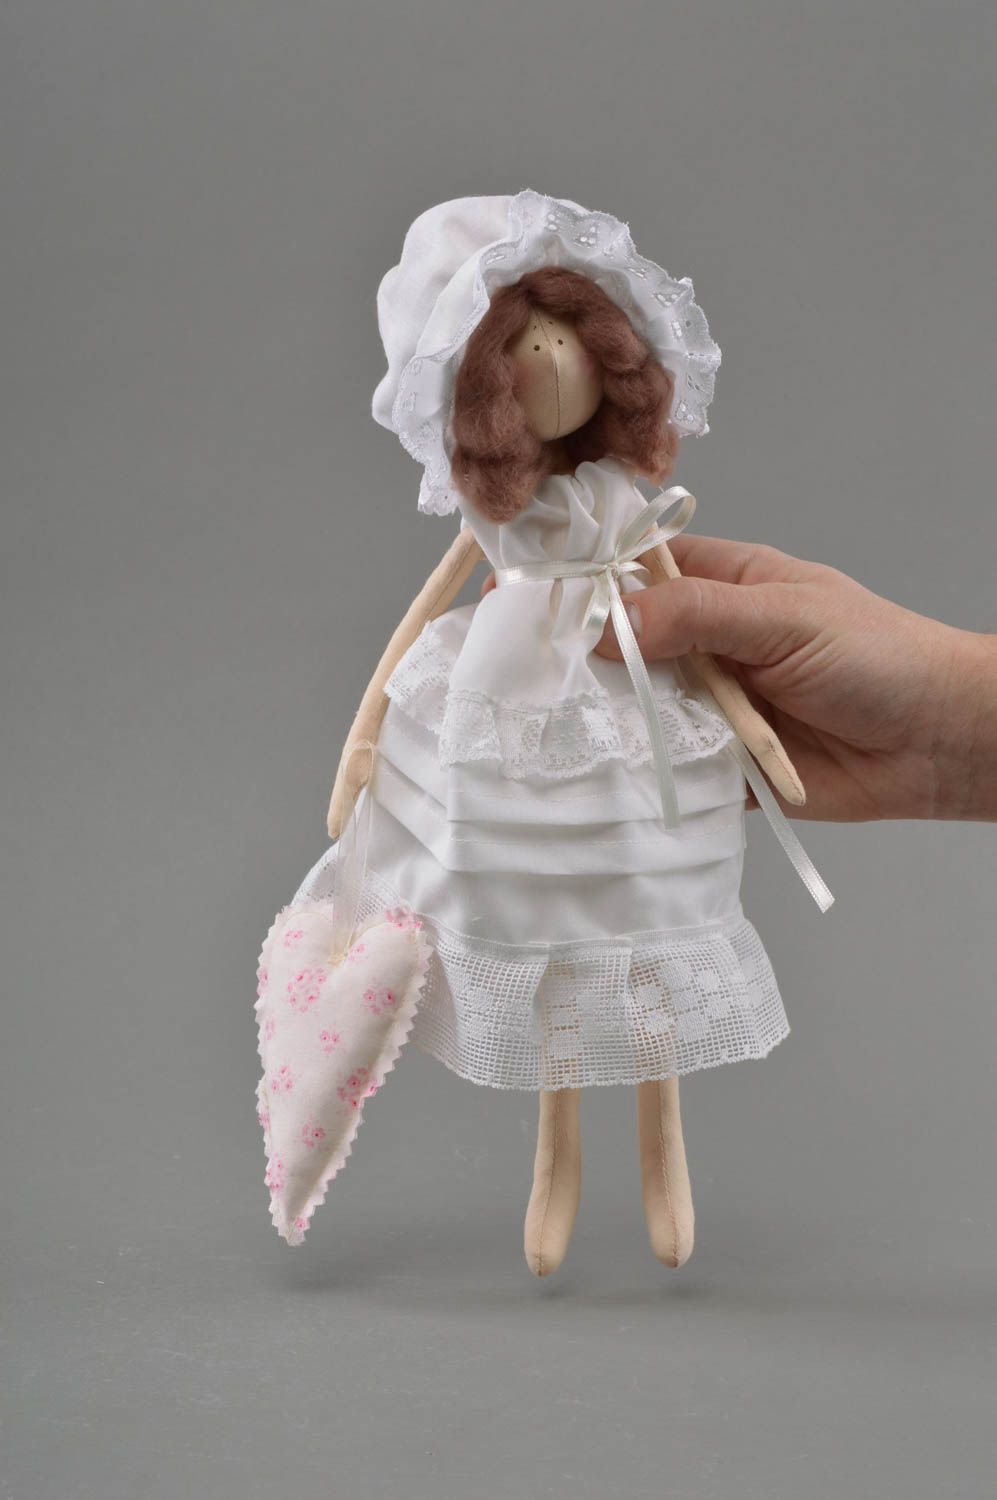 Handmade cute toy doll made of fabric in white dress and bonnet on stand photo 5